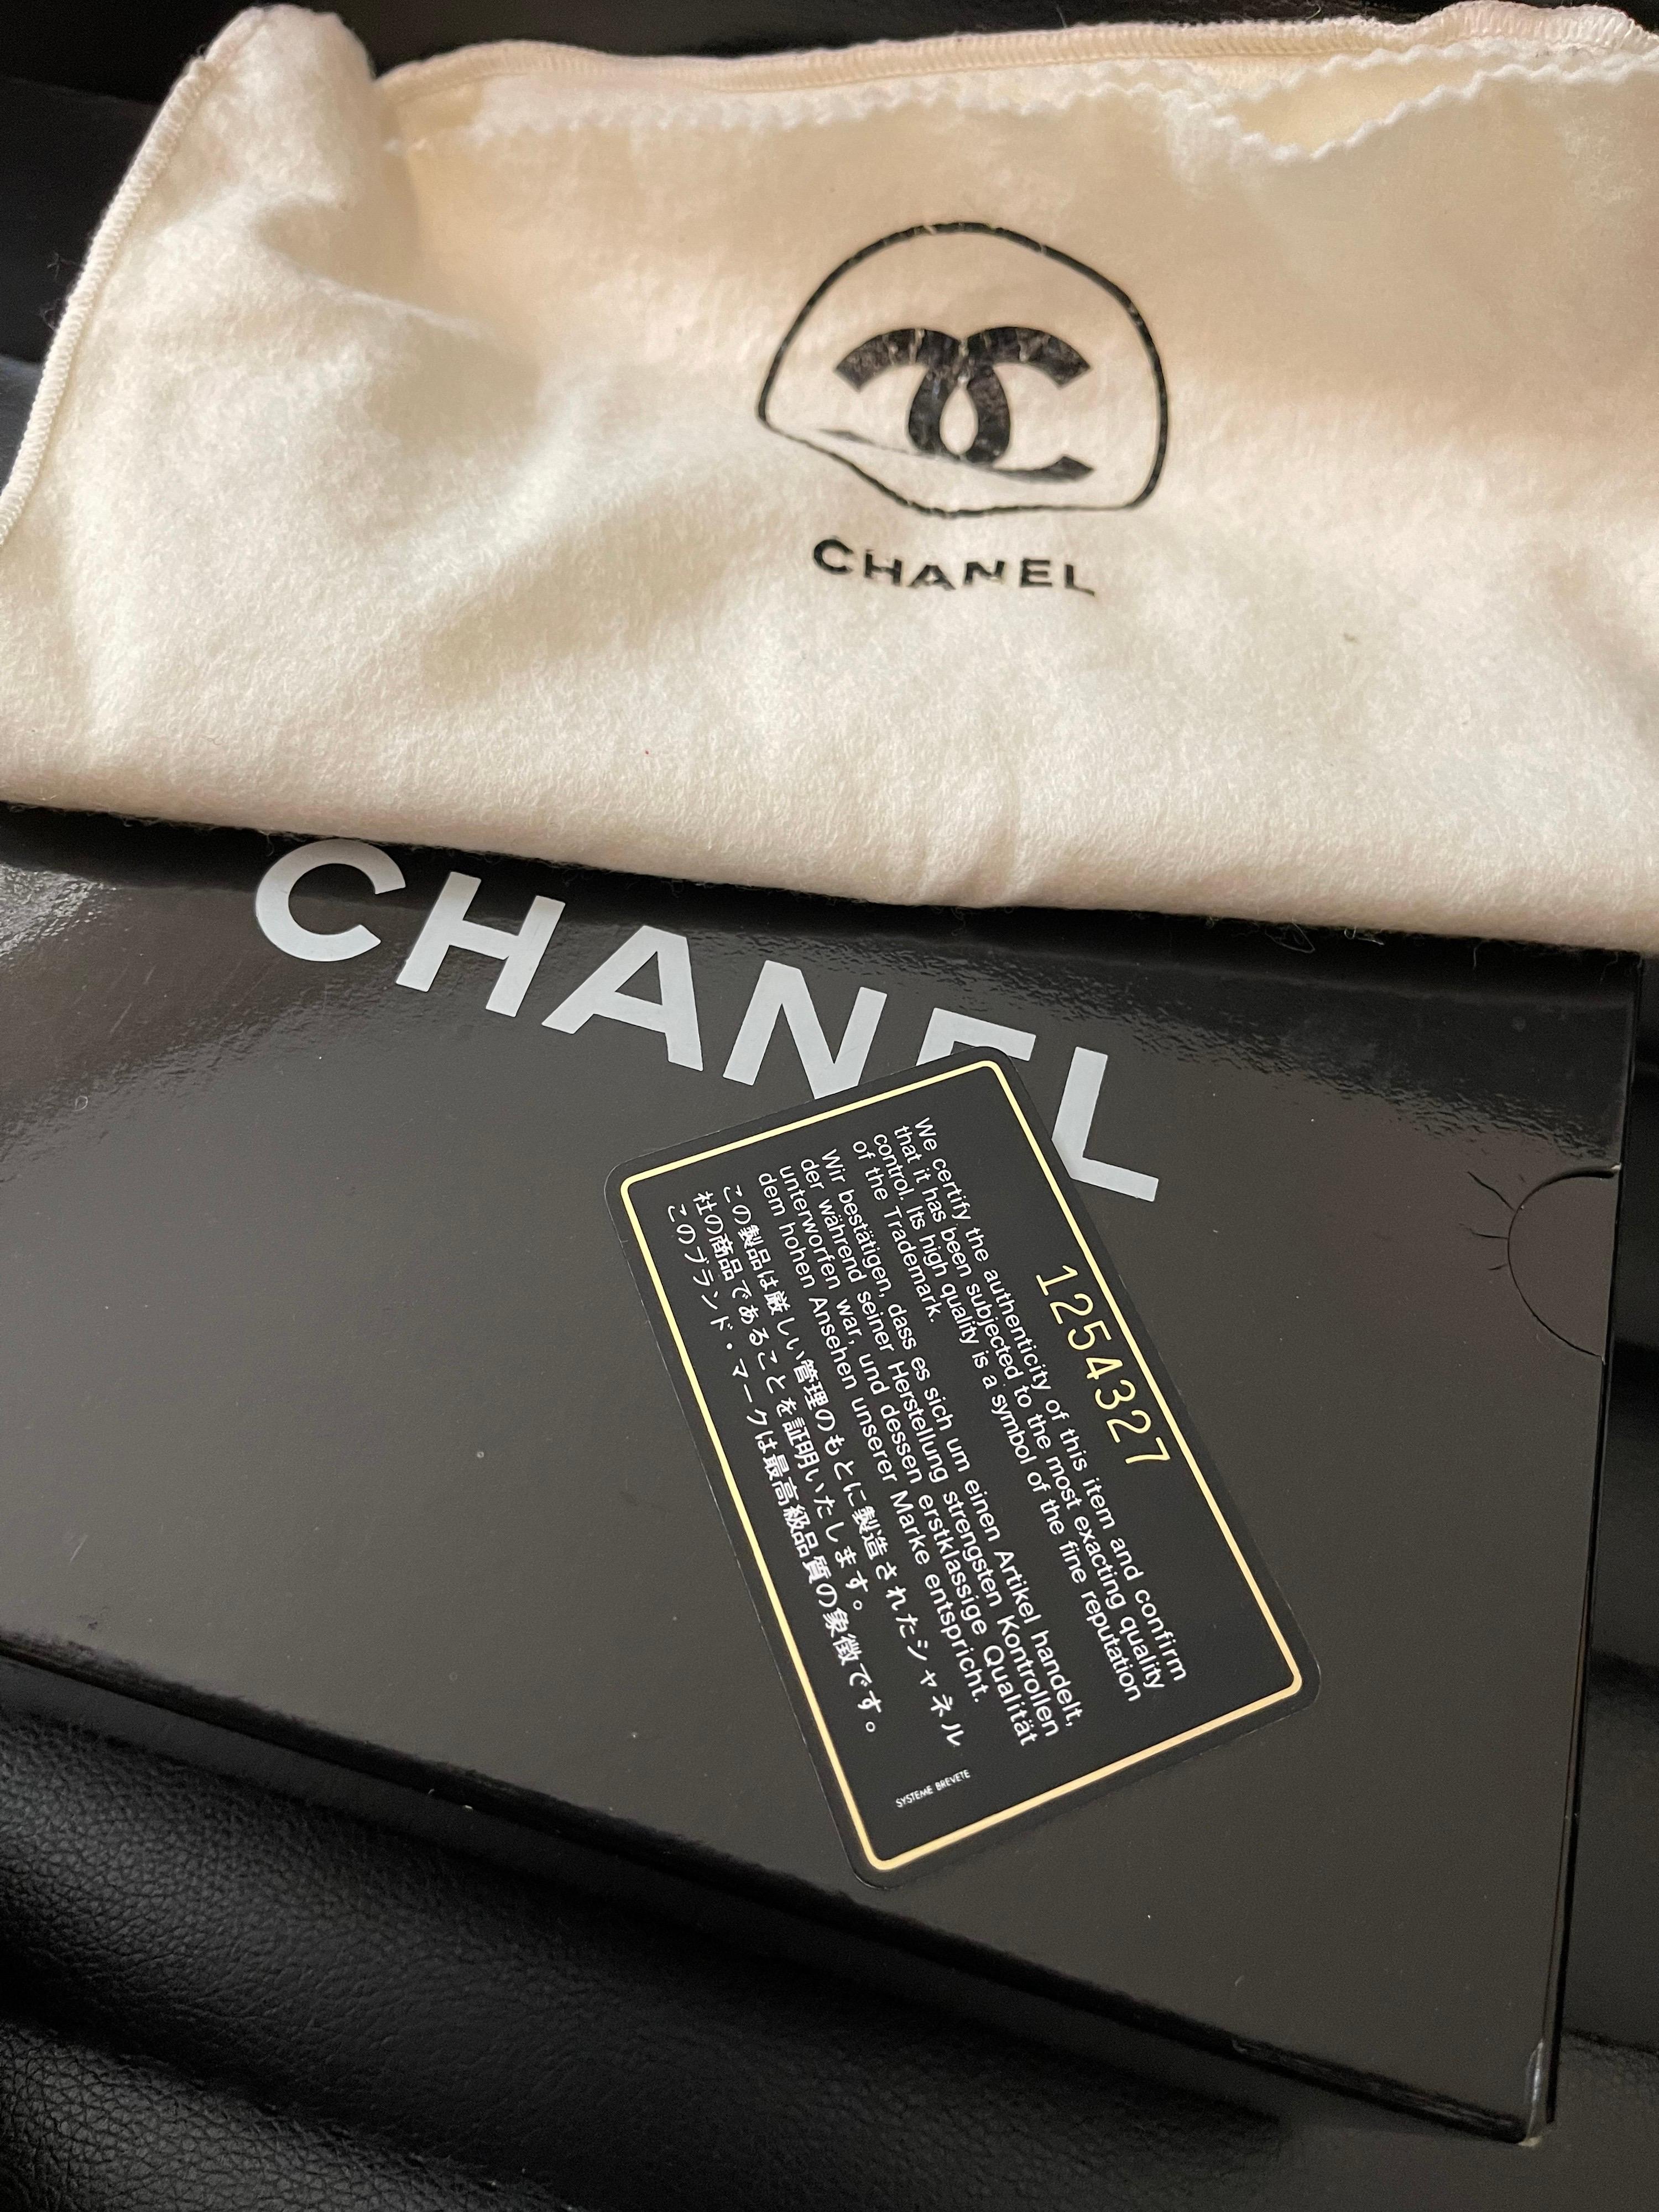 Be retro glam wearing this vintage tan leather single flap vintage bag by Chanel! 24K plated hardware. Comes with original dust bag, box, and authenticity card.

Condition: Excellent condition. Very light wear. Comes scratches on inside leather